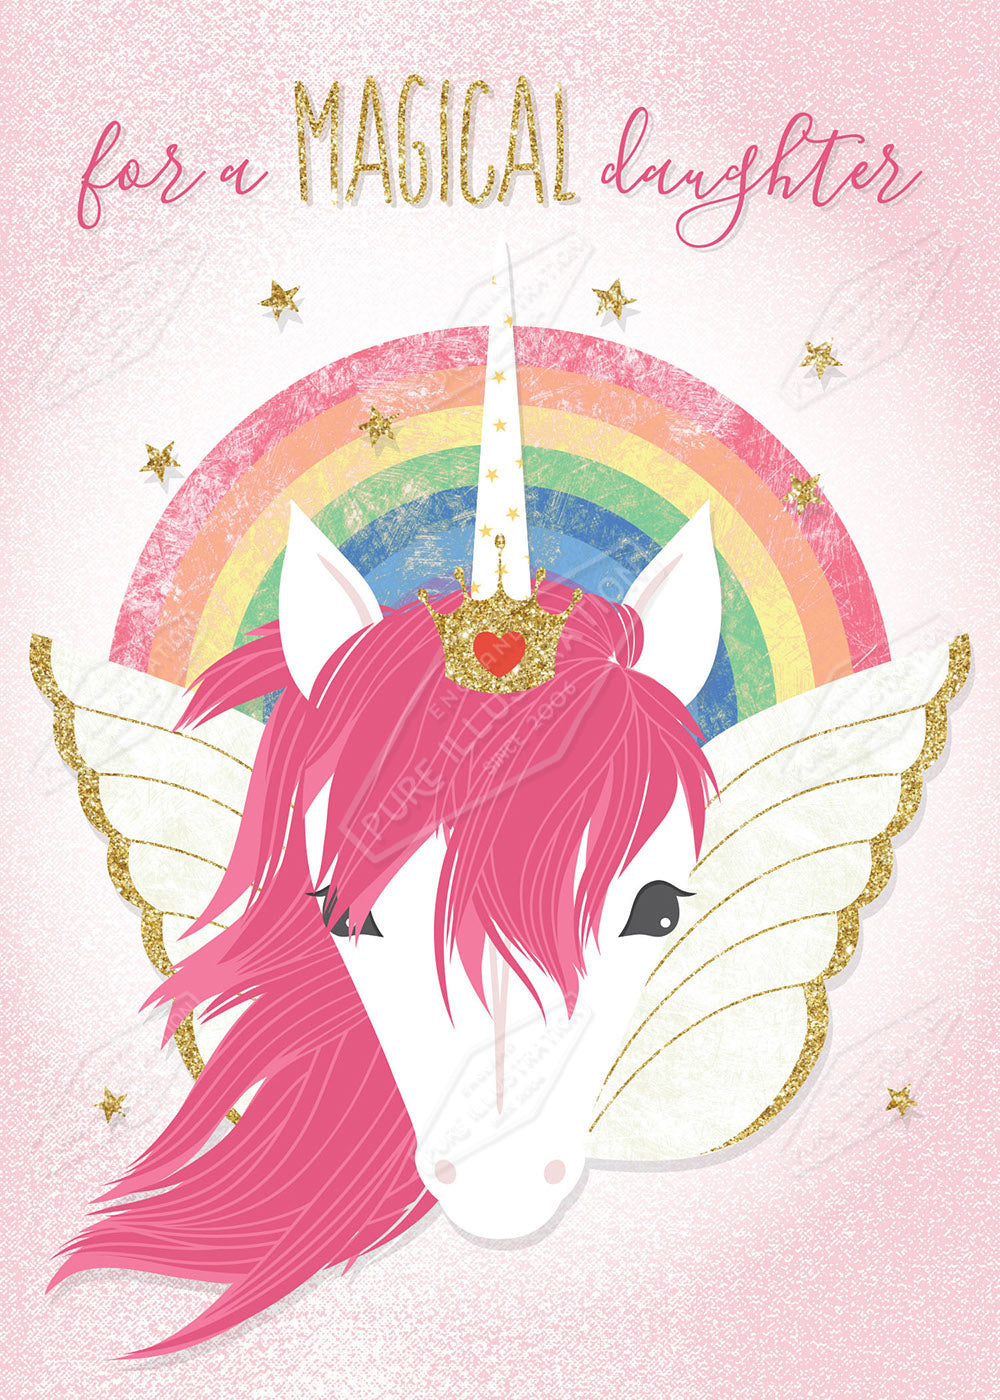 Magical Unicorn design by Gill Eggelston for Pure Art Licensing Agency & Surface Design Studio